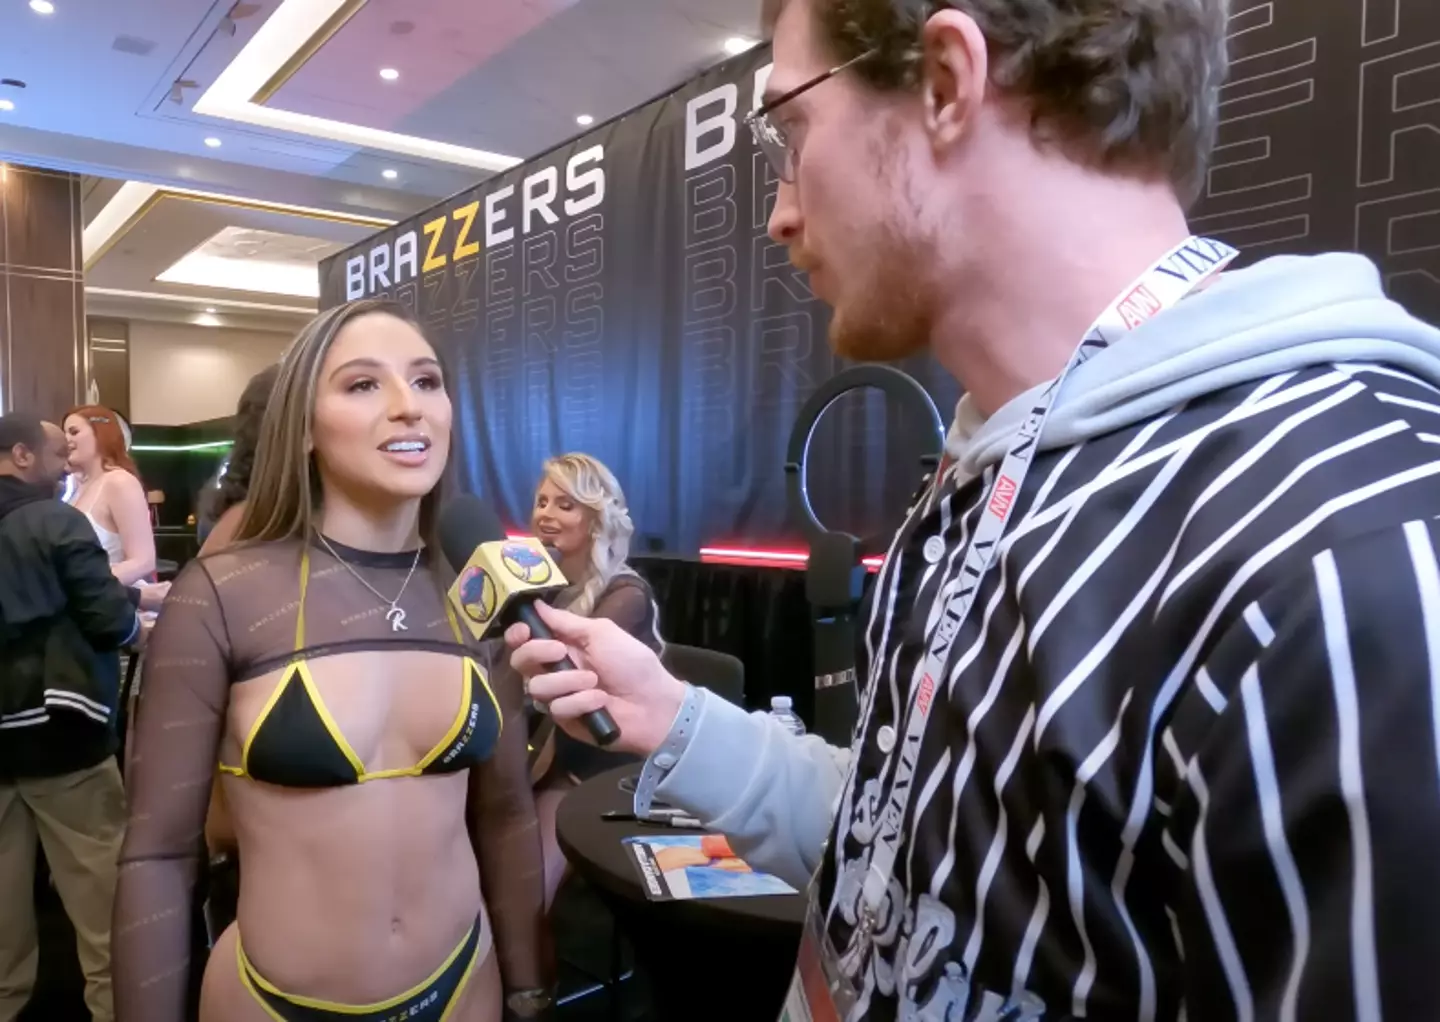 Abella Danger completely lost her s**t with an interviewer.